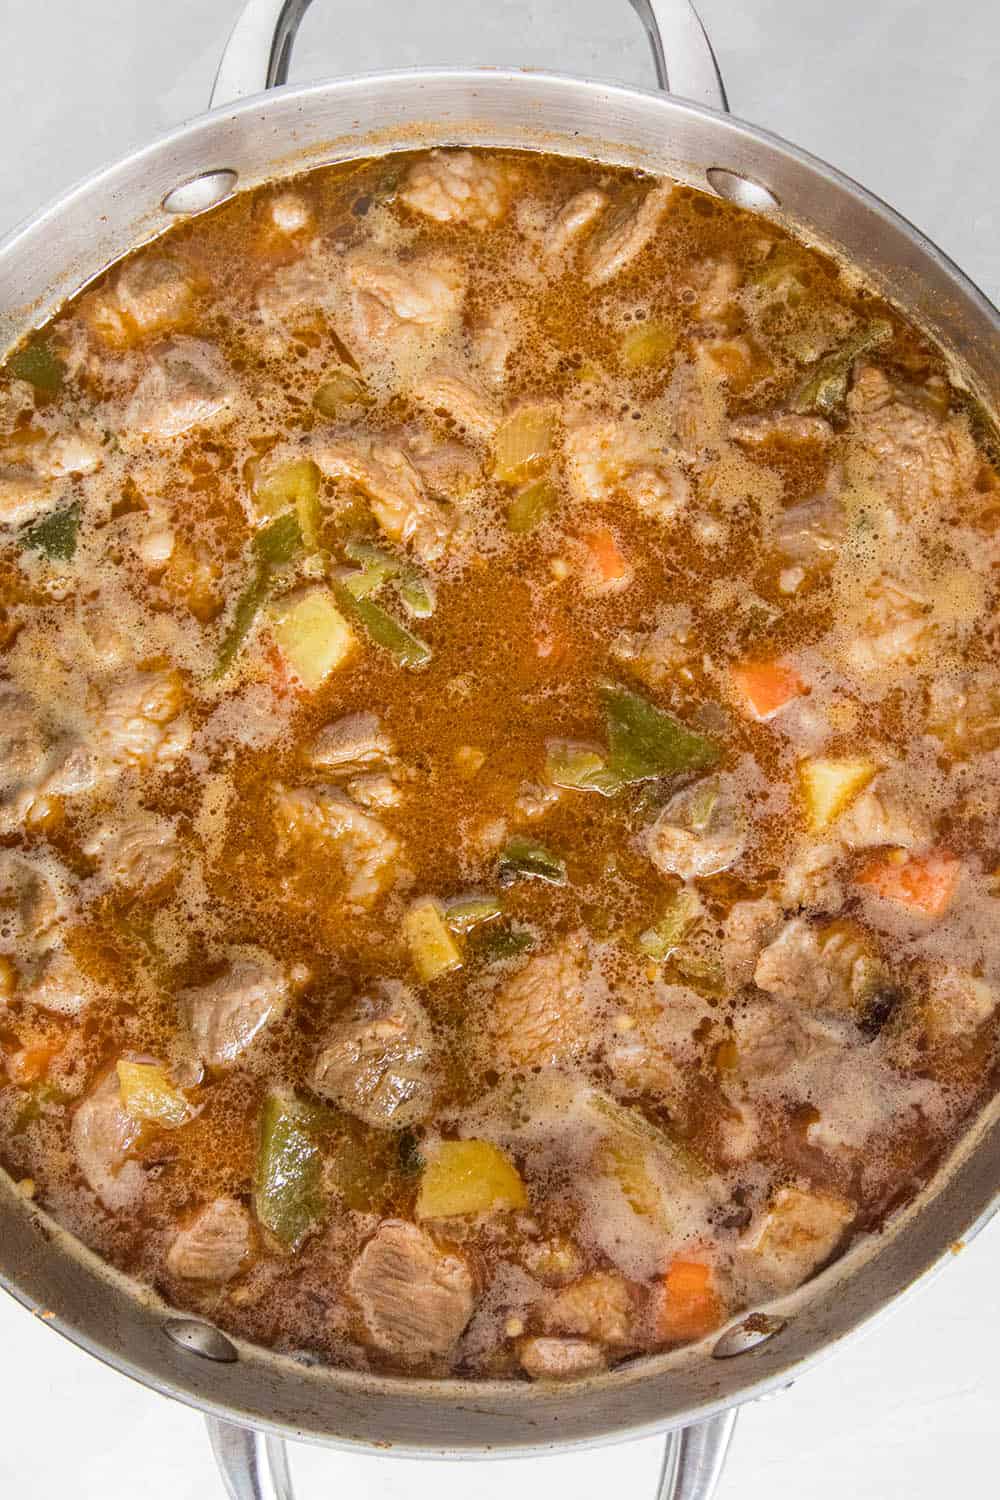 Green Chili Stew with Pork simmering in a pot